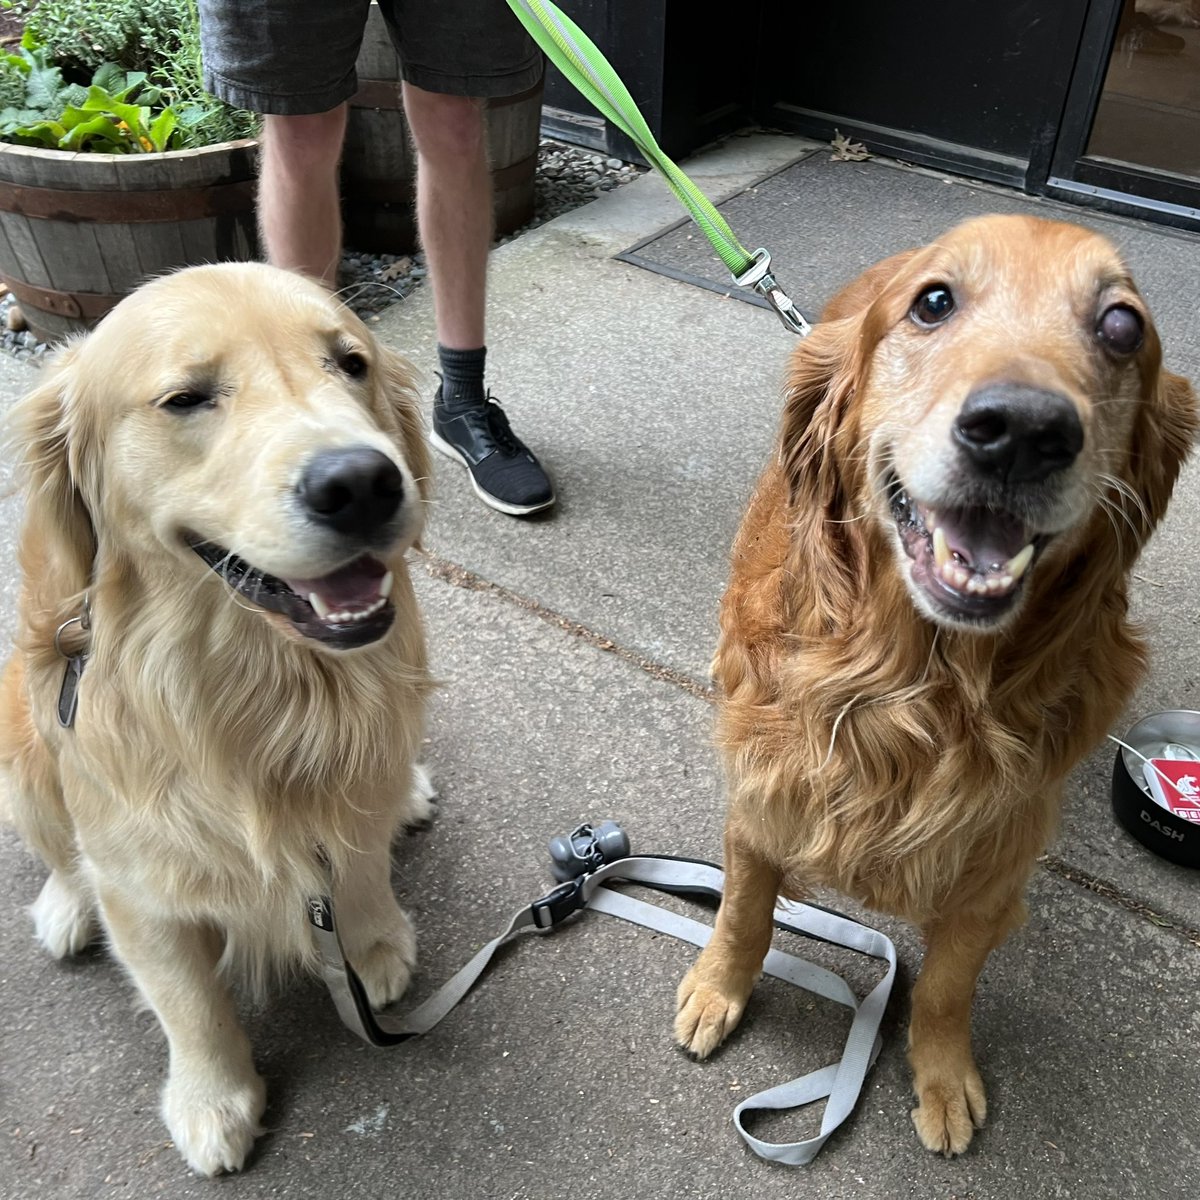 I was able to meet Smol Dog (Chase) and his hooman at @postdocbrewing tonight. They were there promoting the @therealdashdog Pet Memorial Program Fund at @wsuvetmed. #LuckyPuppers #LivingMyBestLife #CancerSucks #DogsAndBeer #GoldenRetrievers